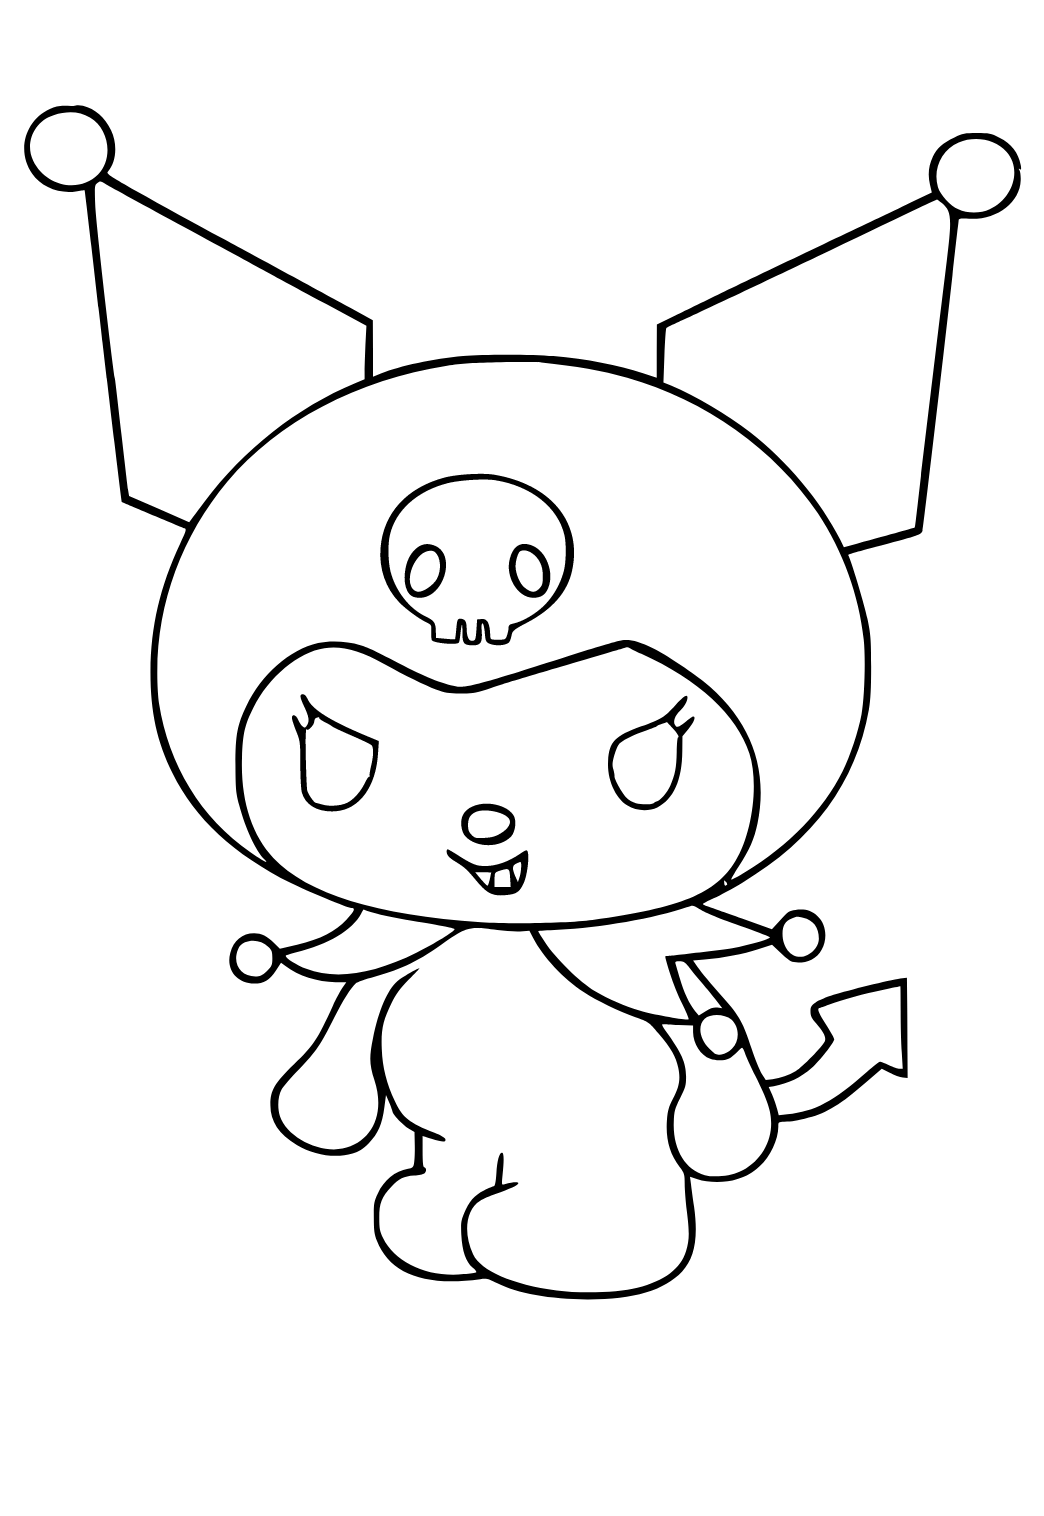 Free printable kuromi easy coloring page for adults and kids